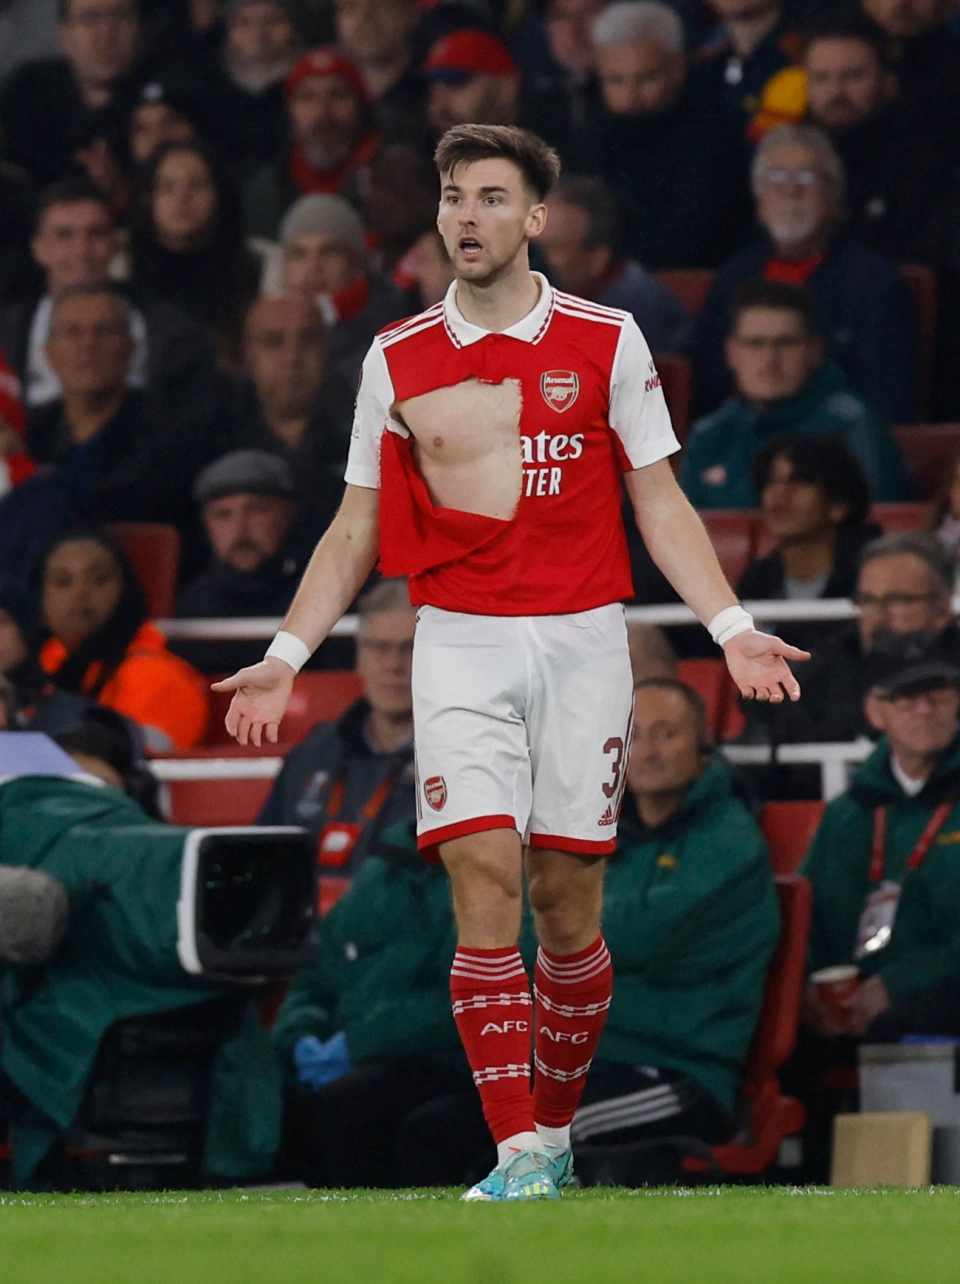 Tierney's jersey almost ripped off by Zurich opponent after his goal lifted Arsenal to top of Europa group